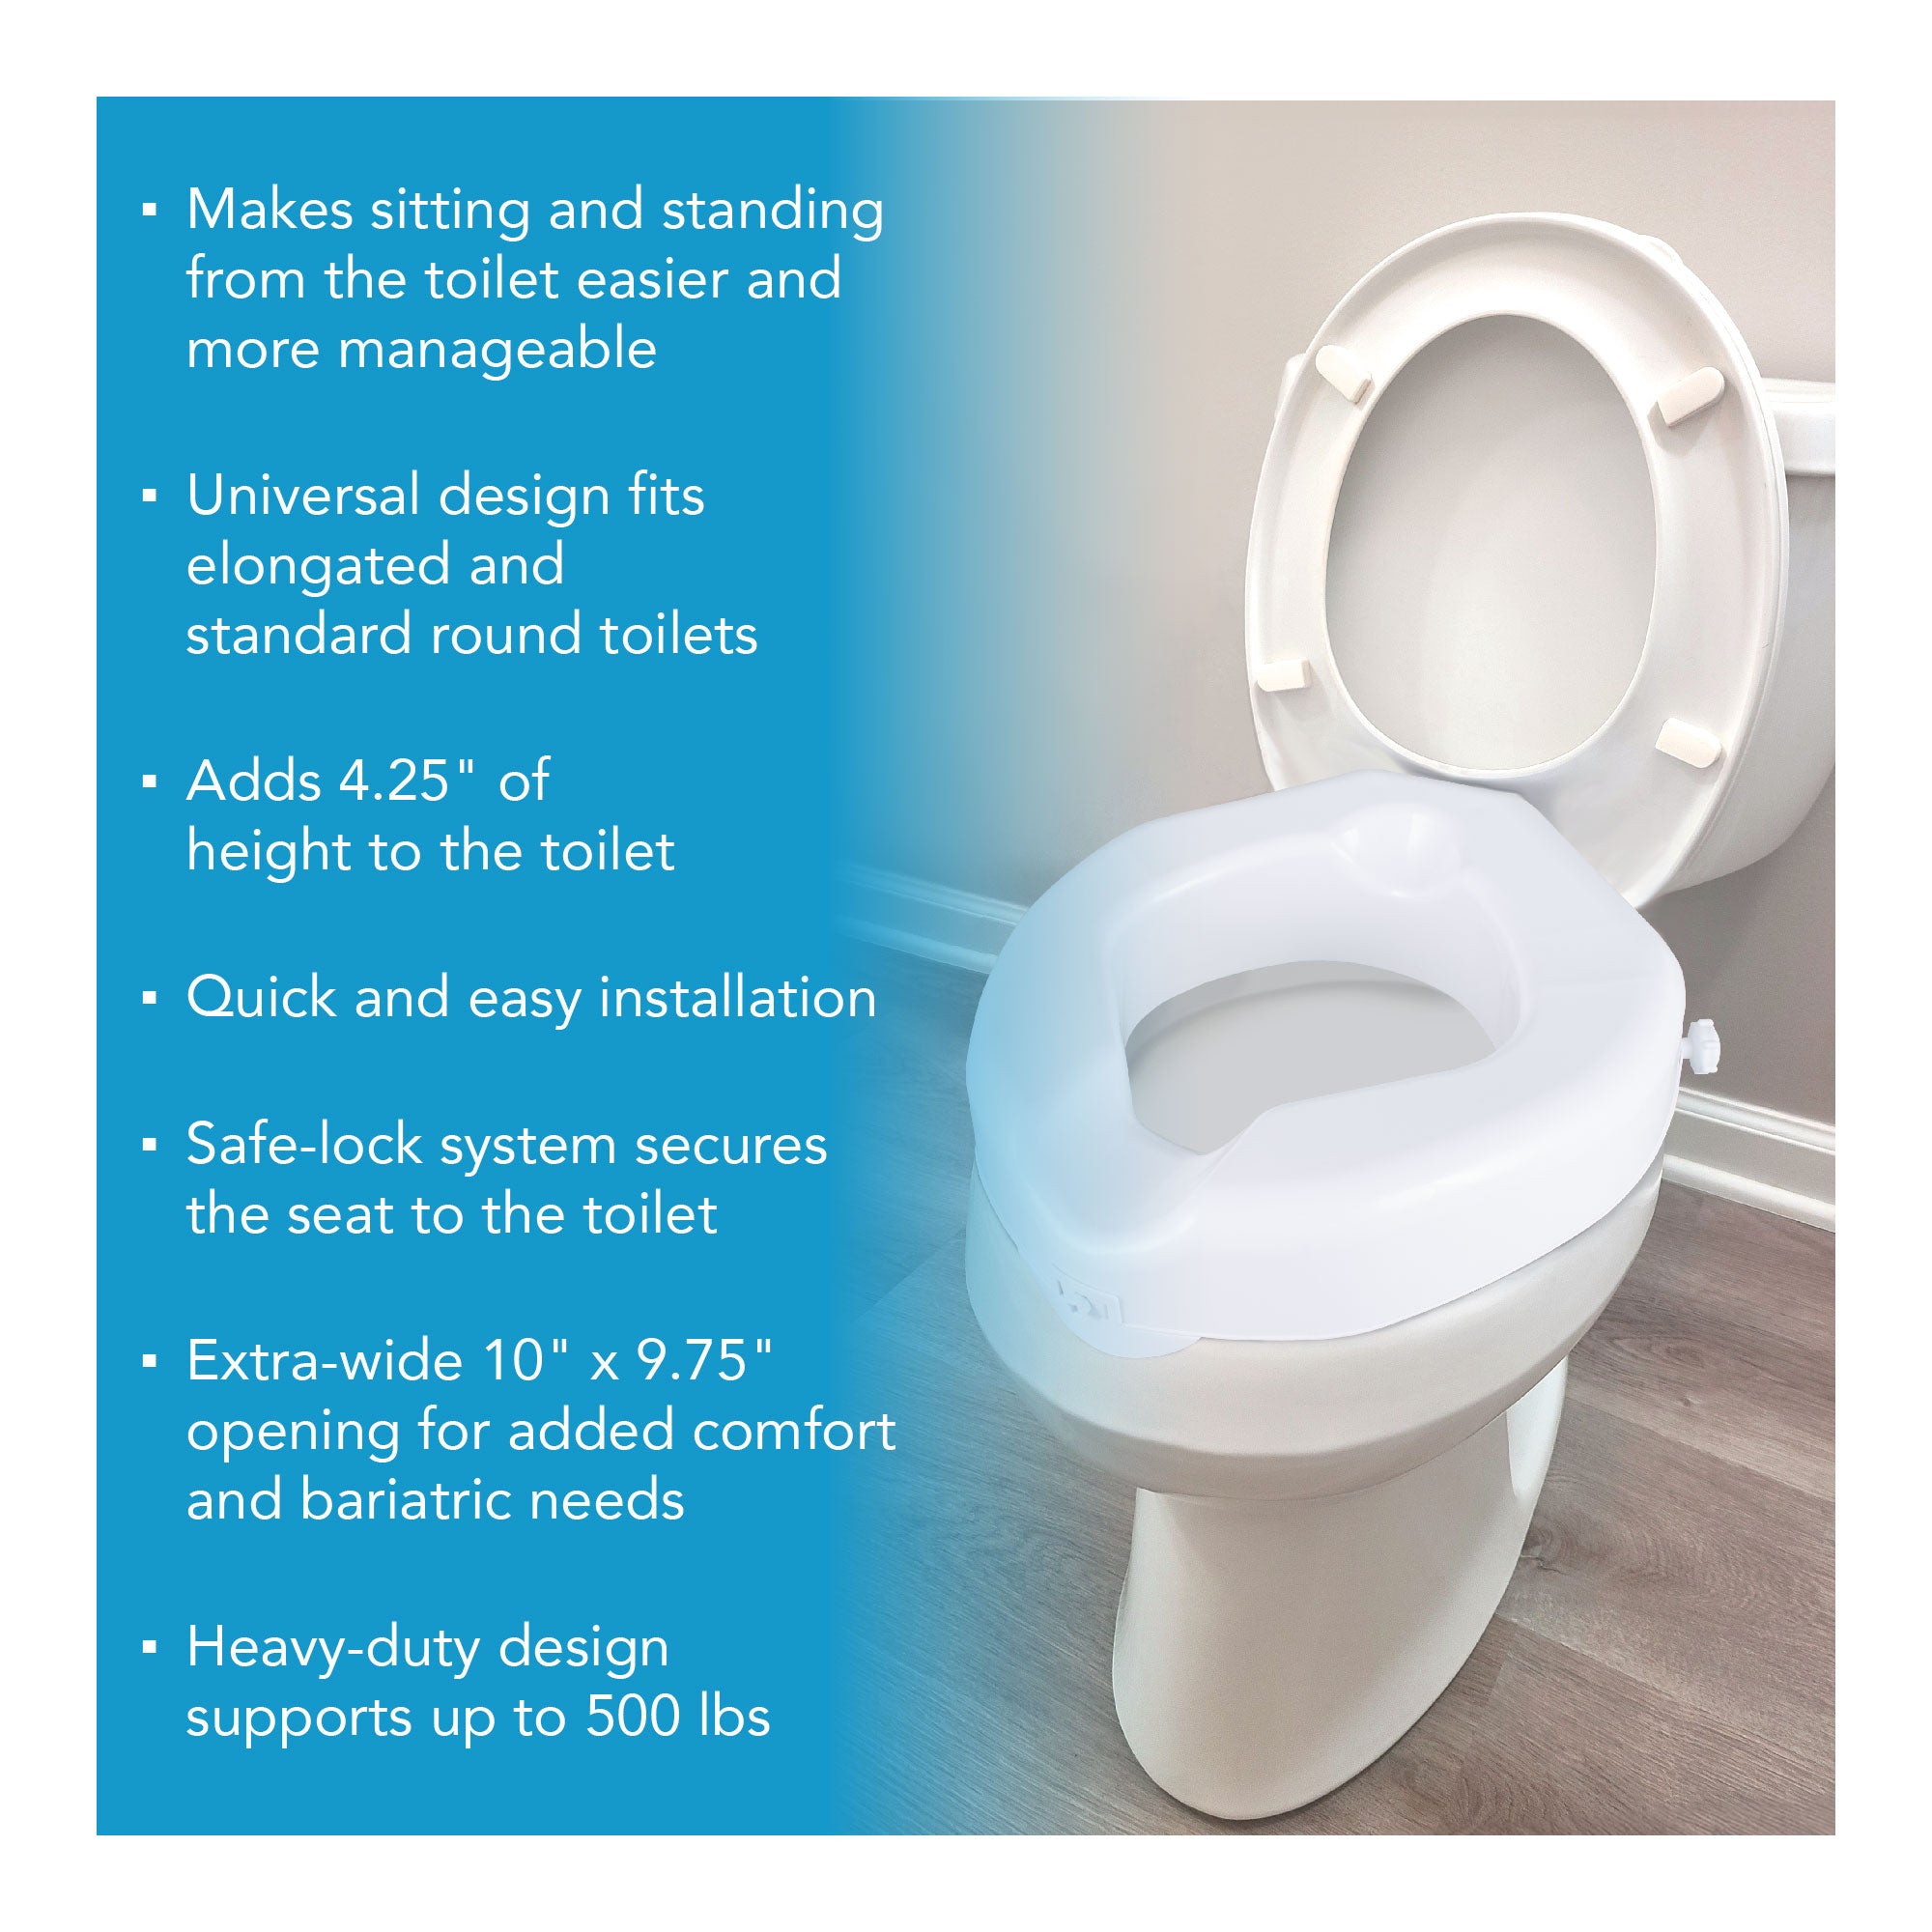 A bariatric raised toilet seat on a toilet. Text showing its features.